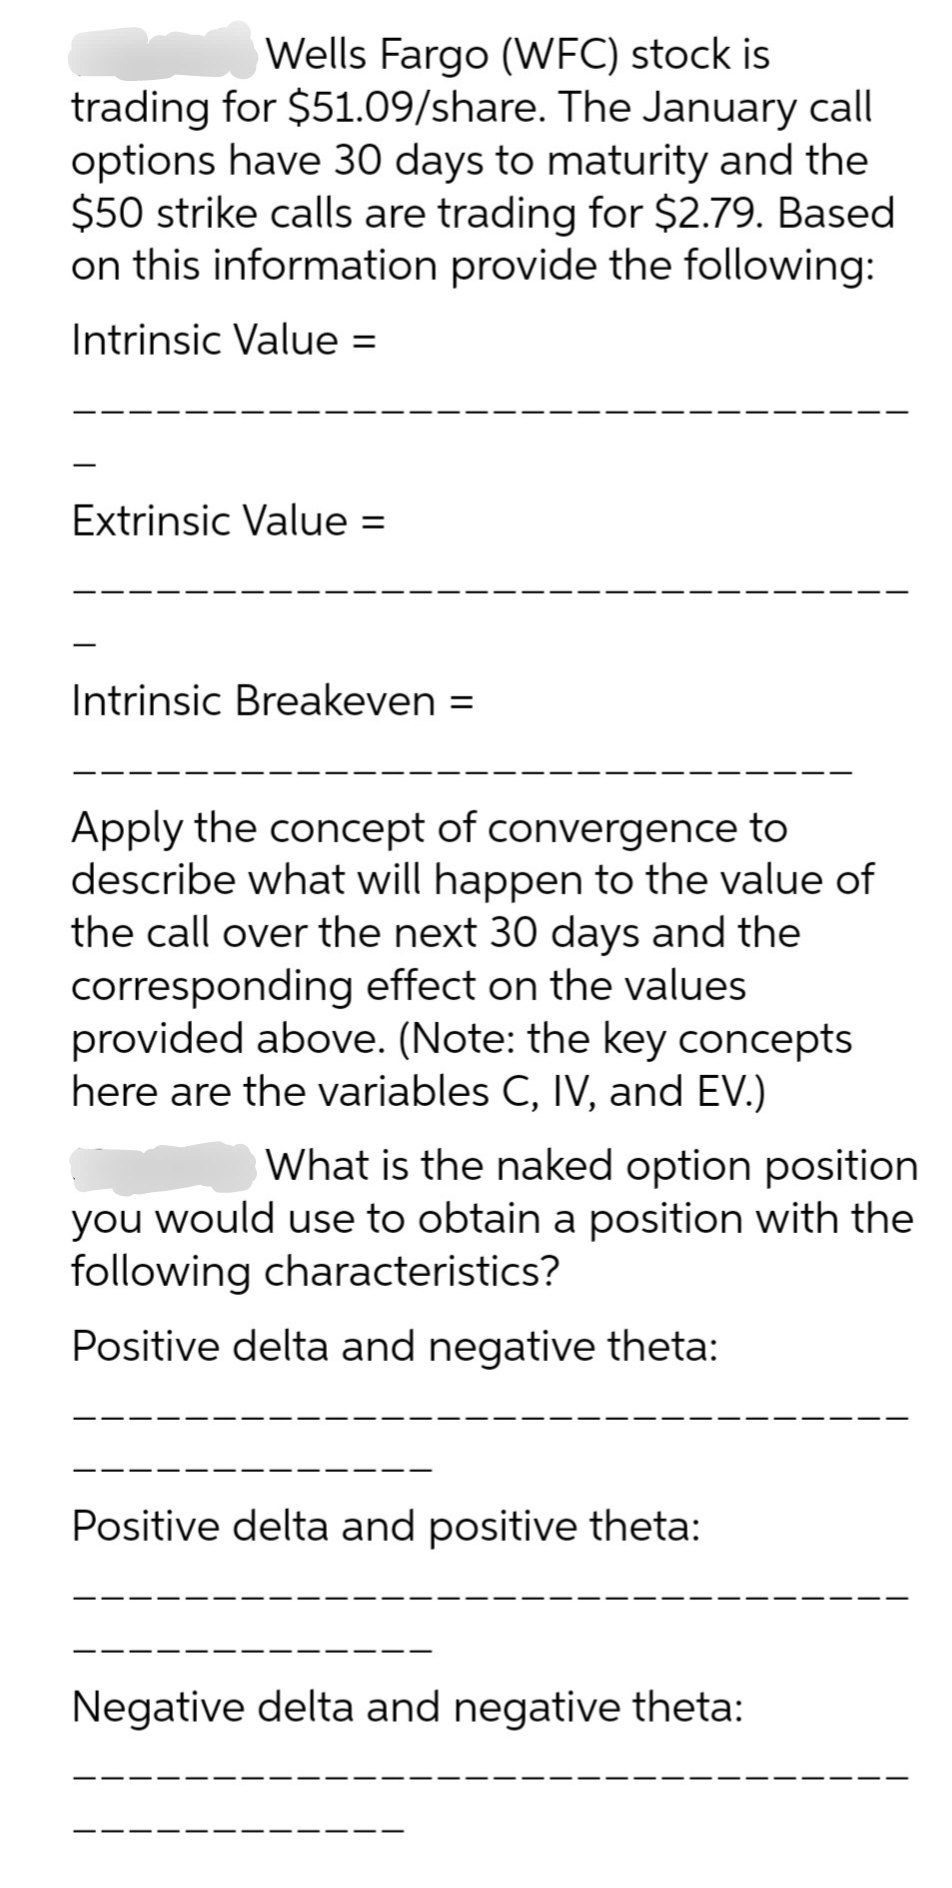 Wells Fargo (WFC) stock is
trading for $51.09/share. The January call
options have 30 days to maturity and the
$50 strike calls are trading for $2.79. Based
on this information provide the following:
Intrinsic Value: =
Extrinsic Value =
Intrinsic Breakeven =
Apply the concept of convergence to
describe what will happen to the value of
the call over the next 30 days and the
corresponding effect on the values
provided above. (Note: the key concepts
here are the variables C, IV, and EV.)
What is the naked option position
you would use to obtain a position with the
following characteristics?
Positive delta and negative theta:
Positive delta and positive theta:
Negative delta and negative theta: